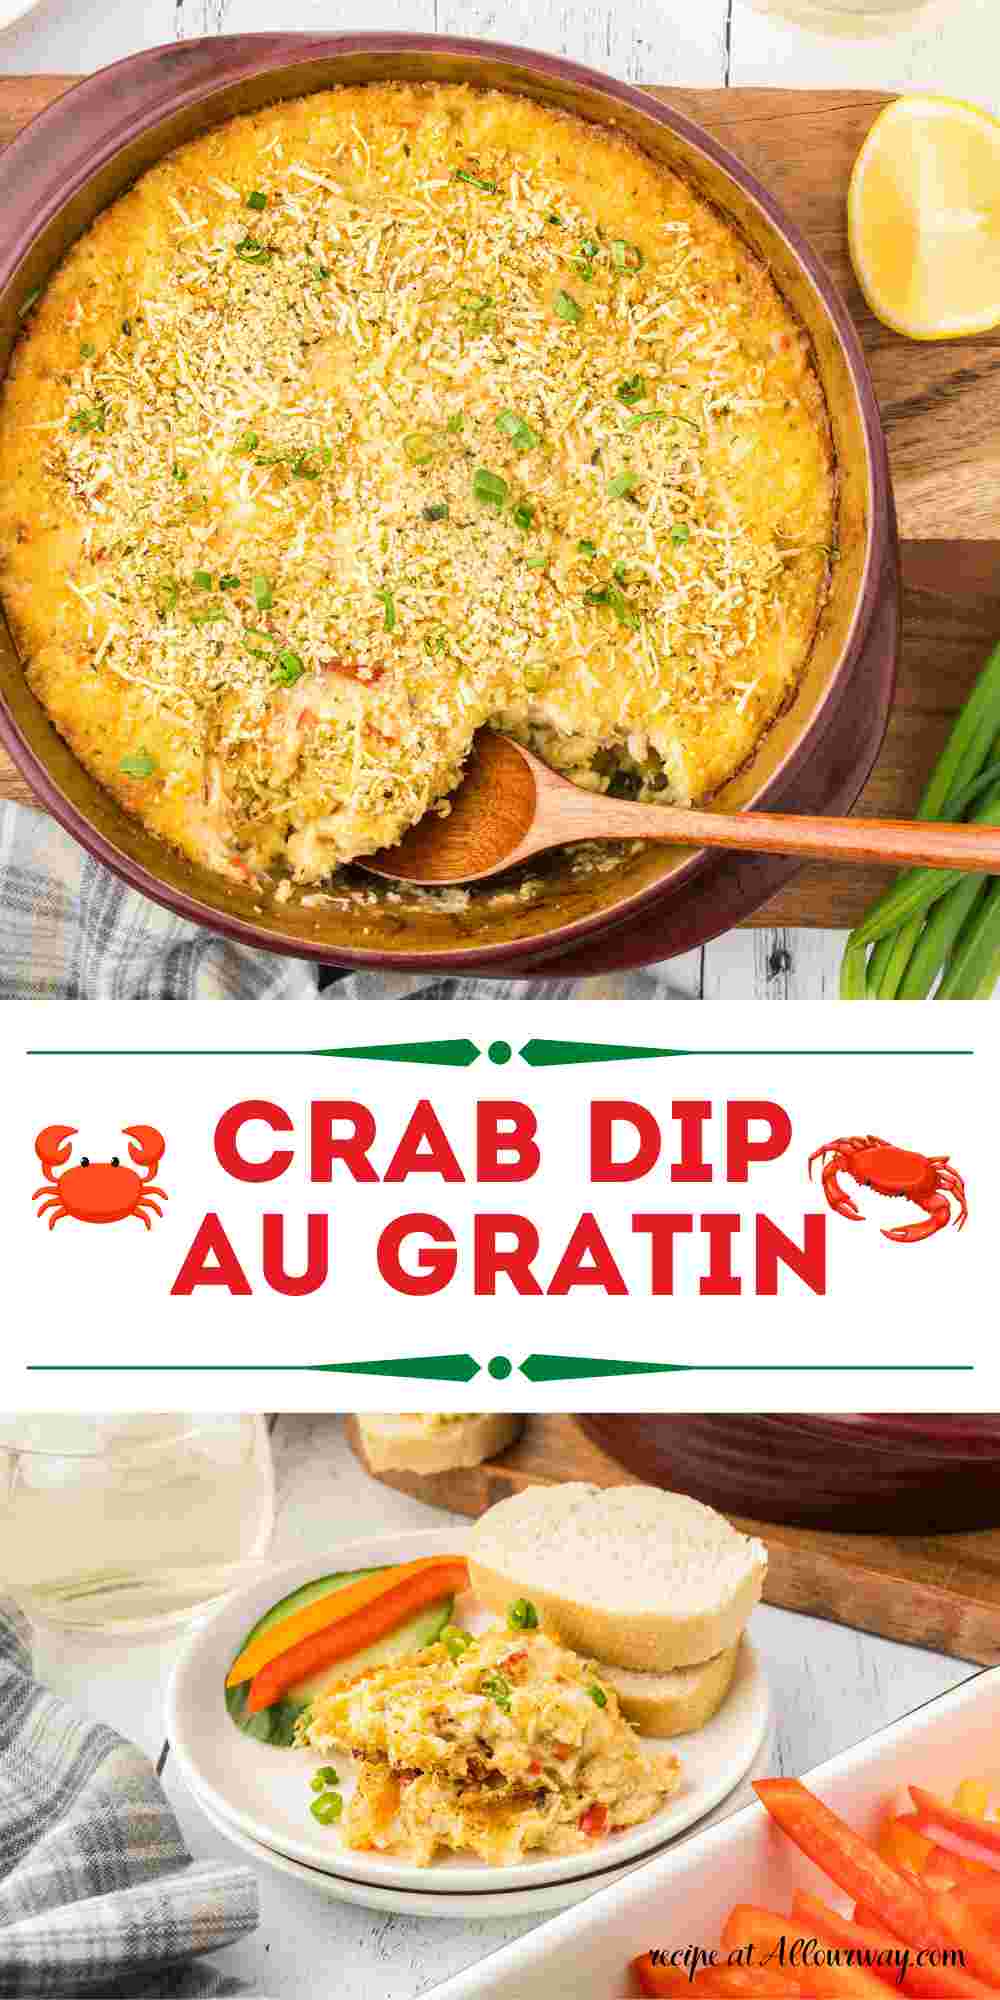 Pinterest collage with title overlay features a casserole dish with crab dip au gratin and a second image with the dip and baguette slices on a white plate.